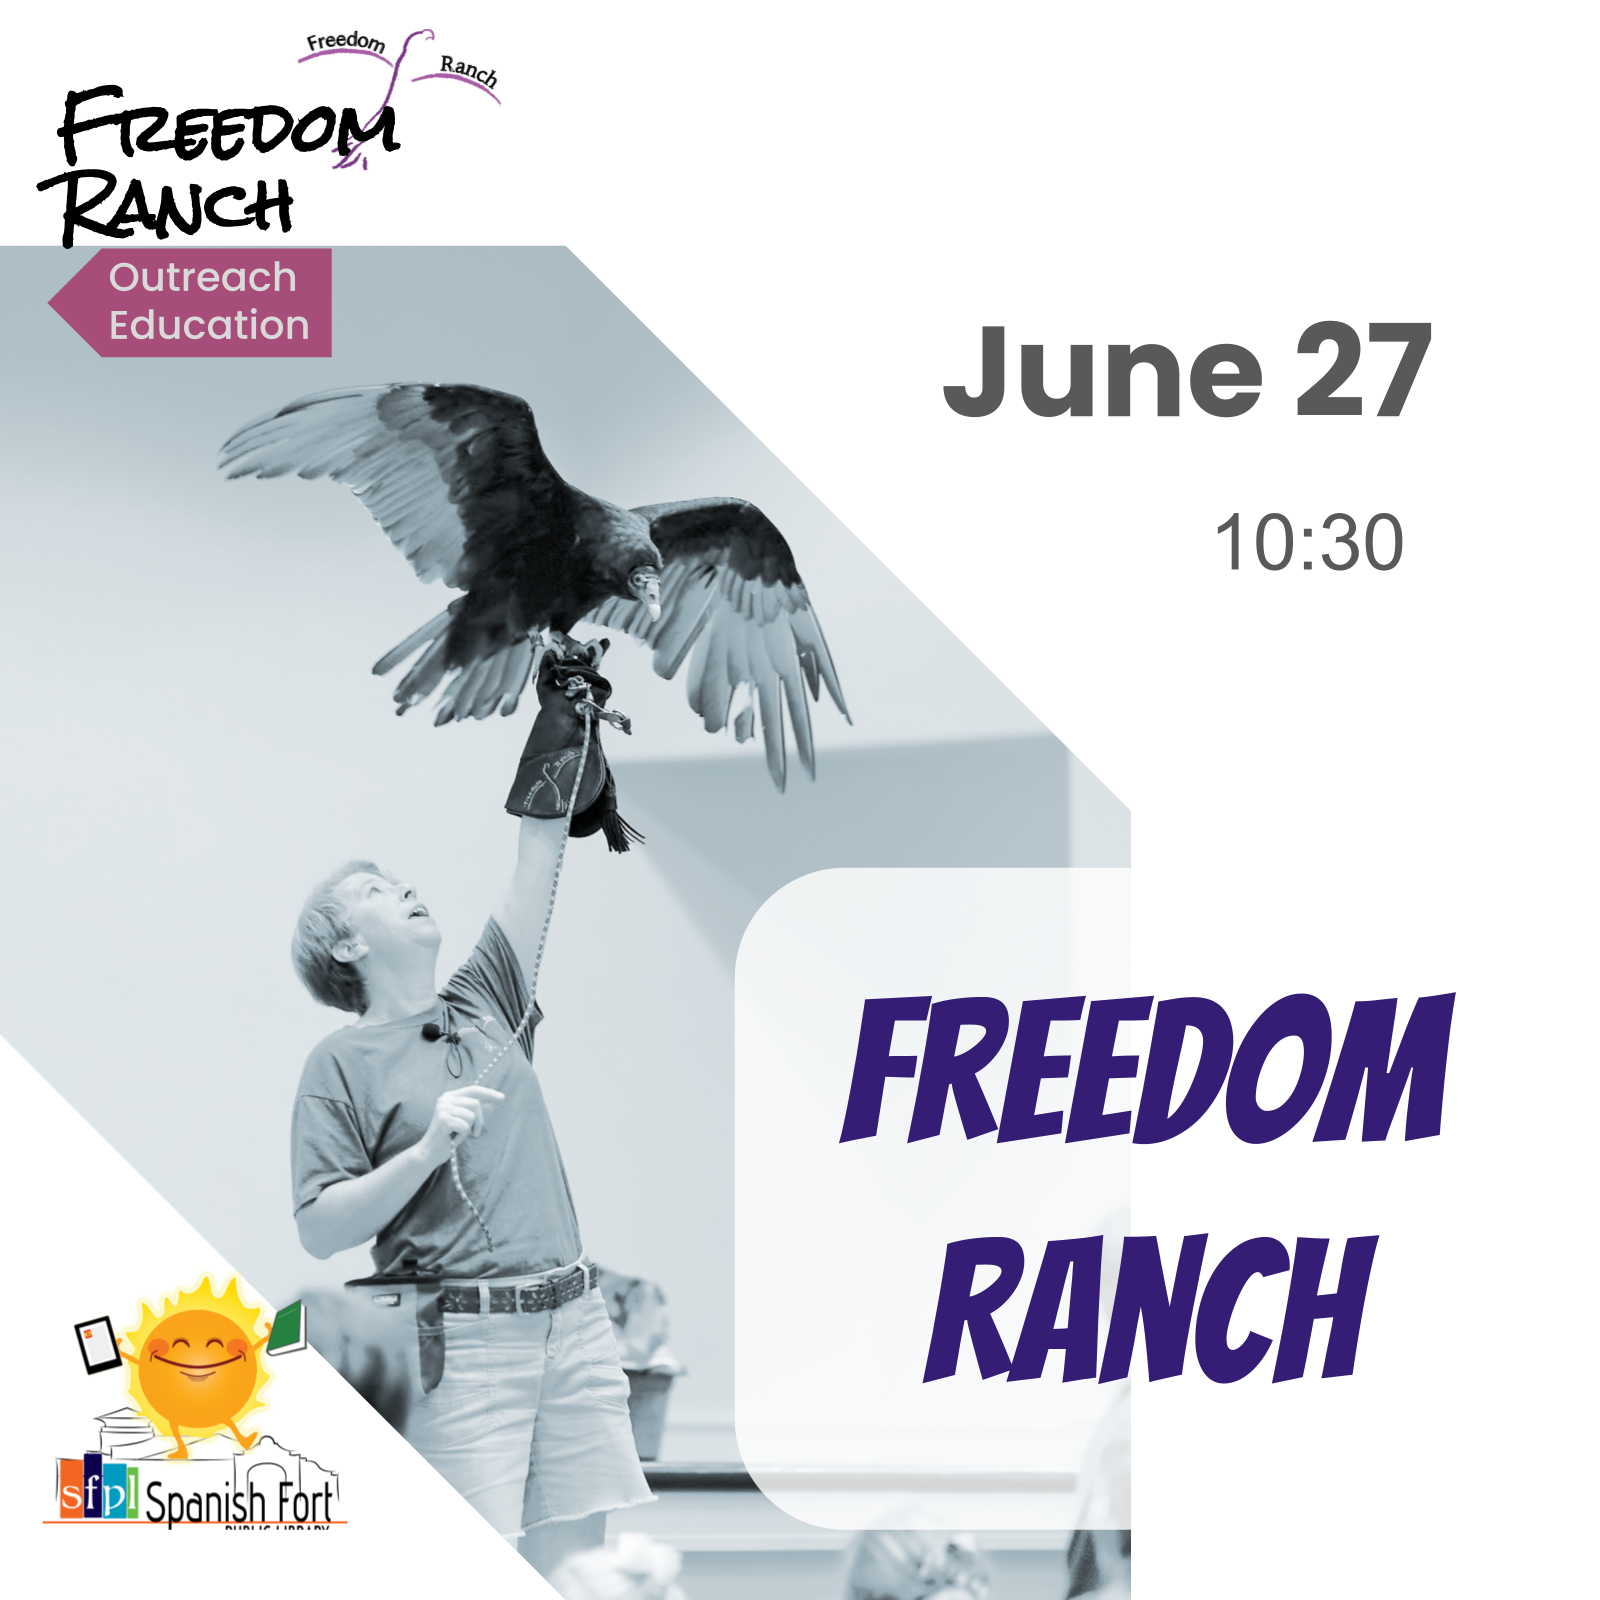 Freedom Ranch Rescue Outreach